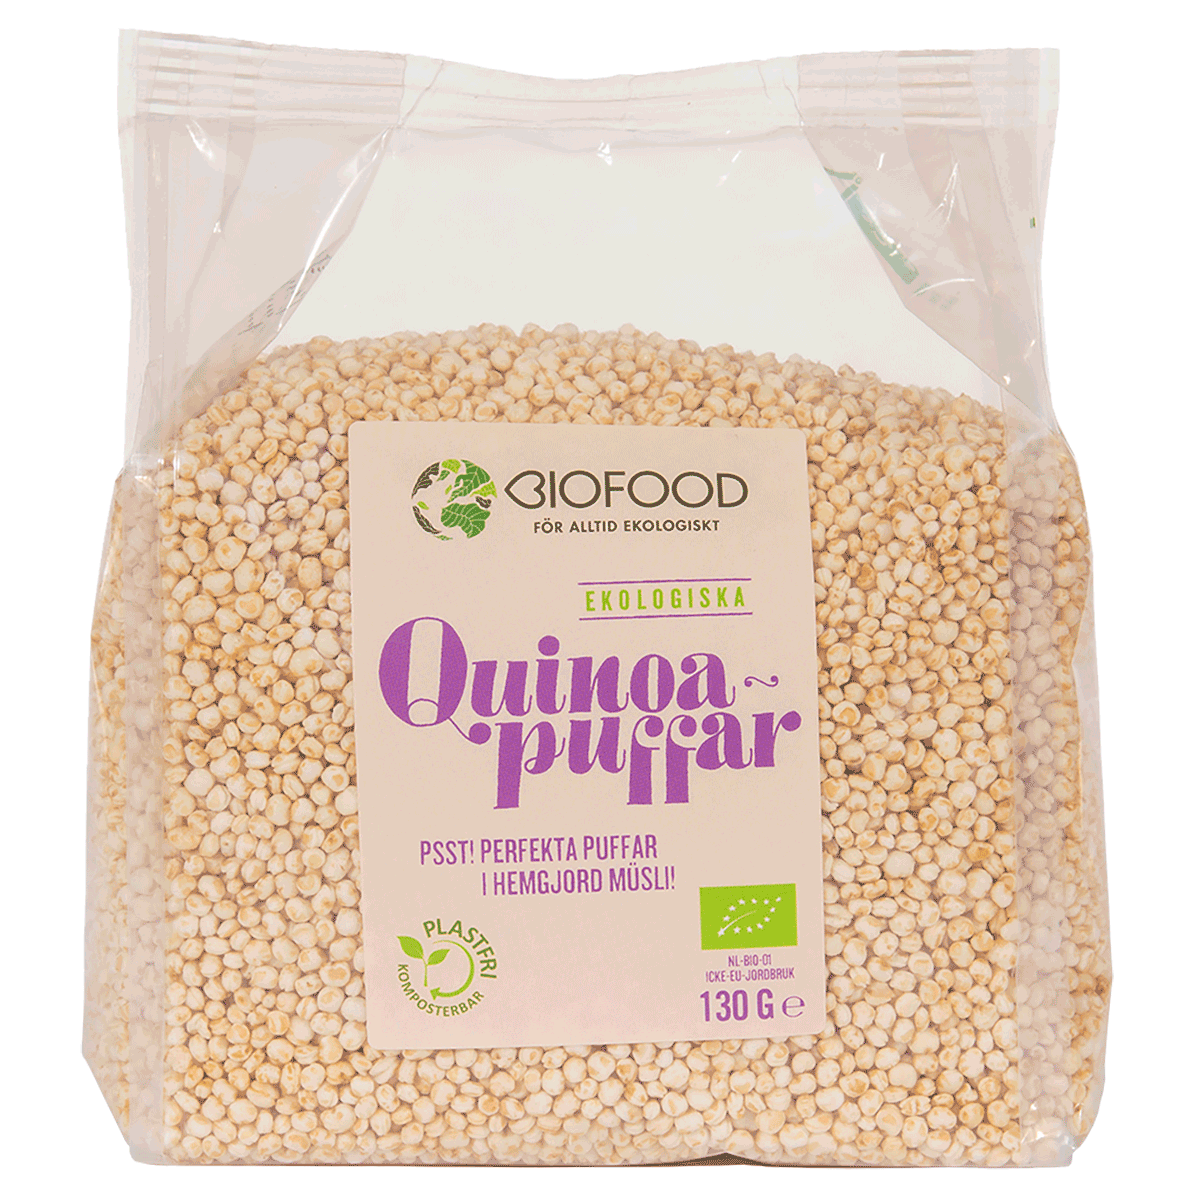 Quinoa puffs from Biofood